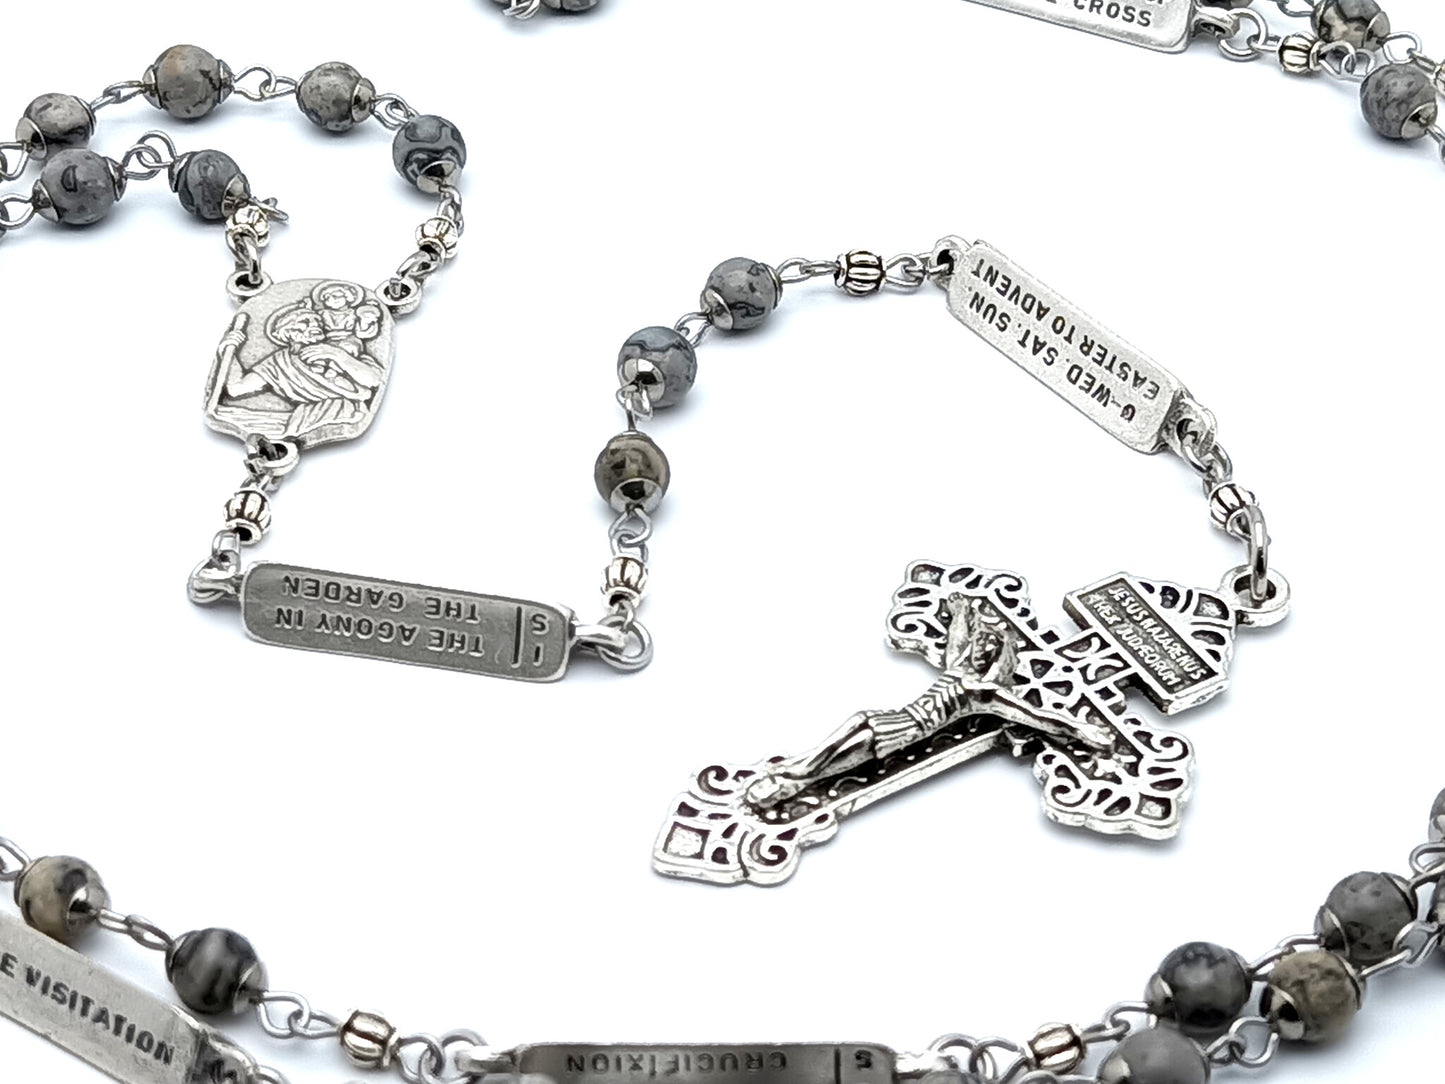 Saint Christopher unique rosary beads with jasper gemstone beads and decade of the rosary linking medals and silver pardon crucifix.